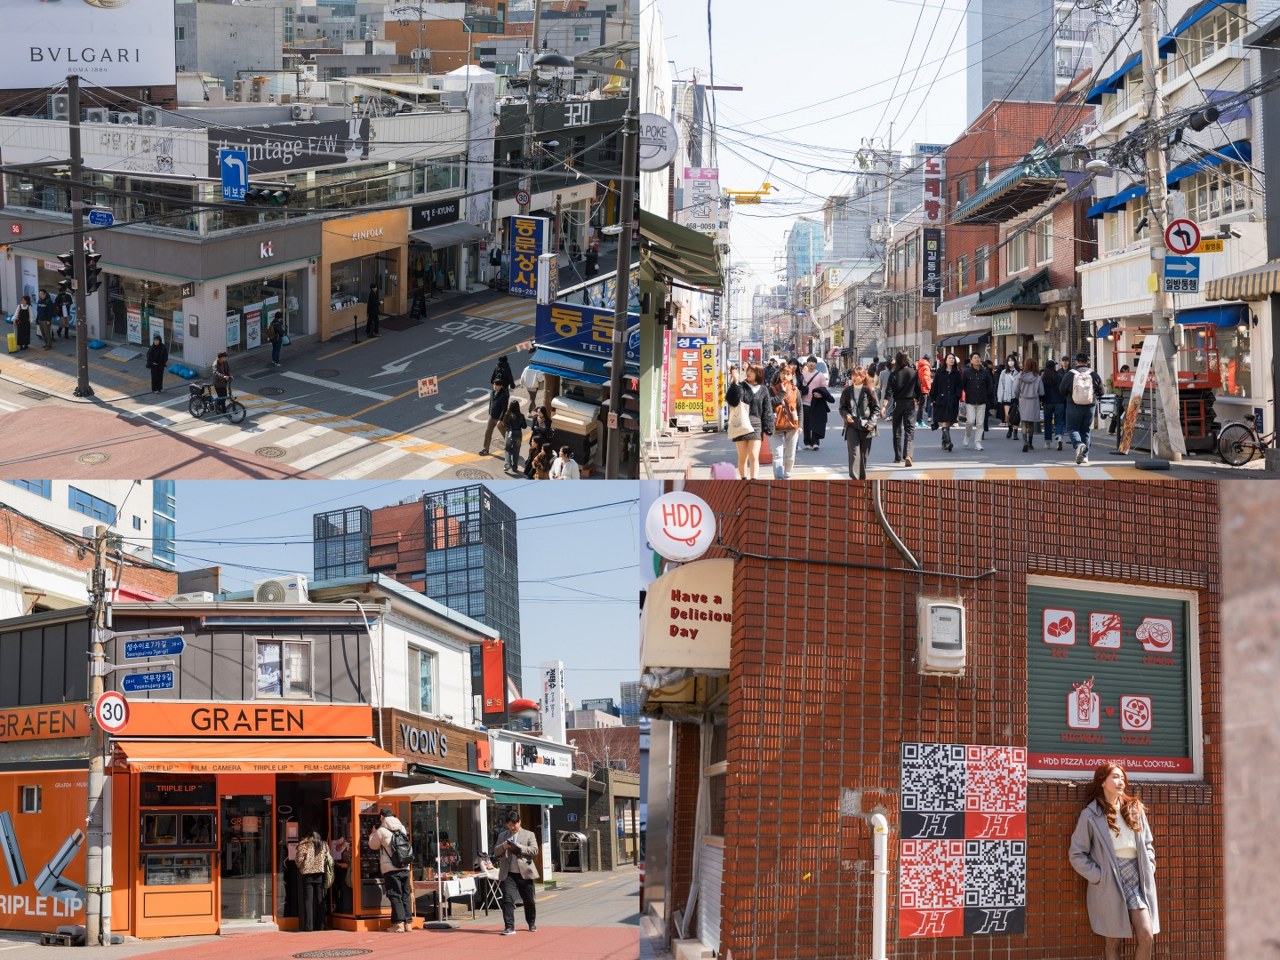 22 Locations for Summer in Seoul